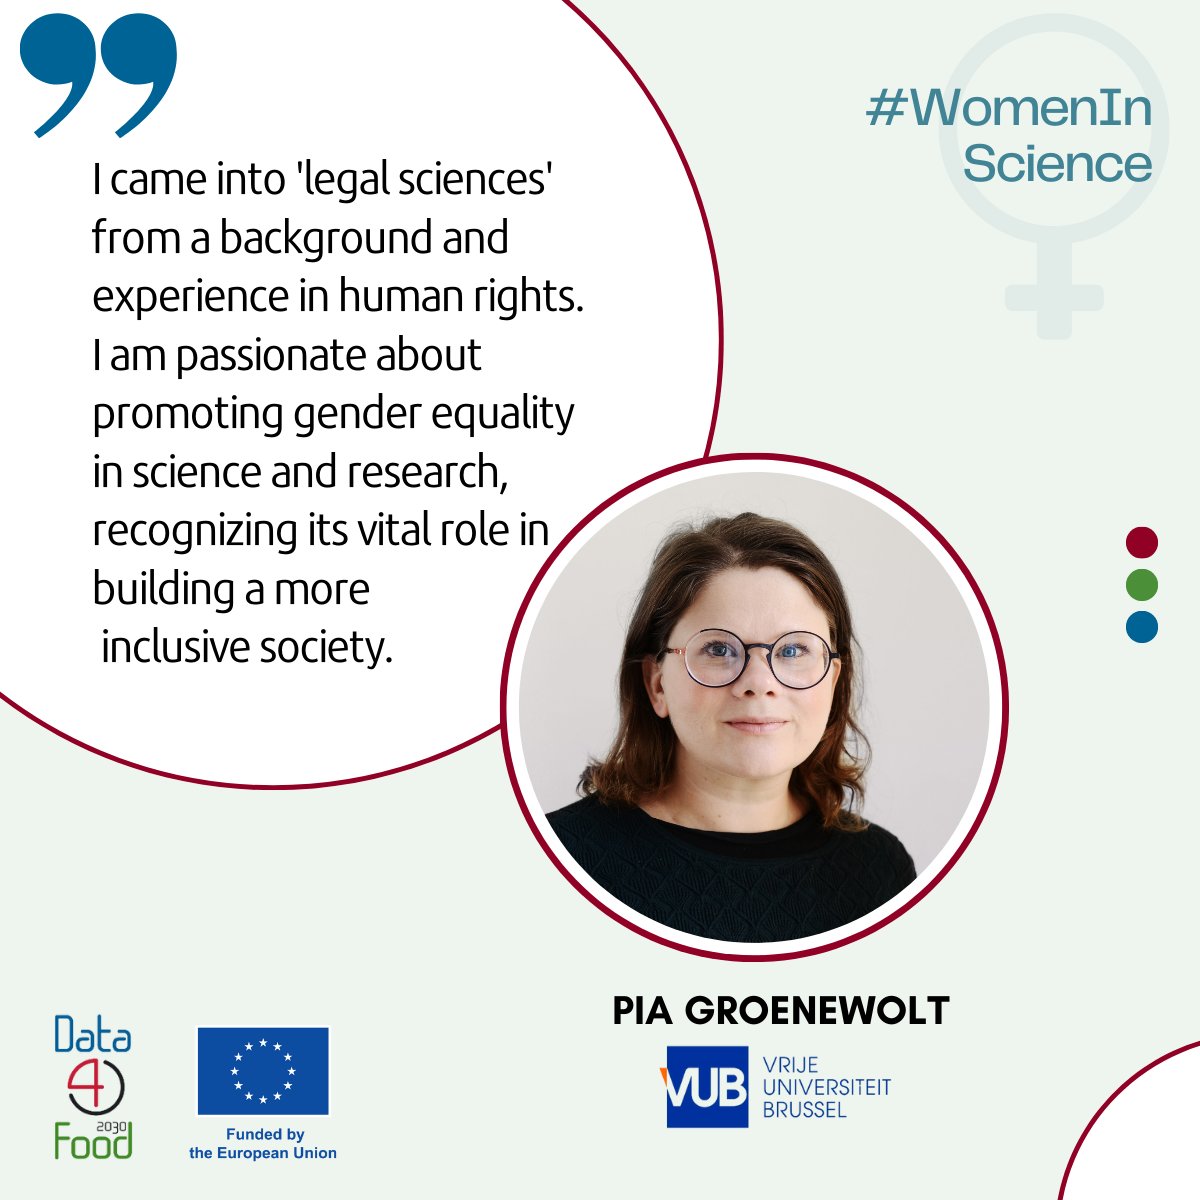 🎉We continue celebrating the brilliant female scientists of the @Data4Food2030 constortium! ✨Today, we present Pia Groenewolt, researcher at @VUBrussel, who shares with us her perspective. 👇 Let's join forces towards #genderequality in science and beyond! ♀️ #womeninscience